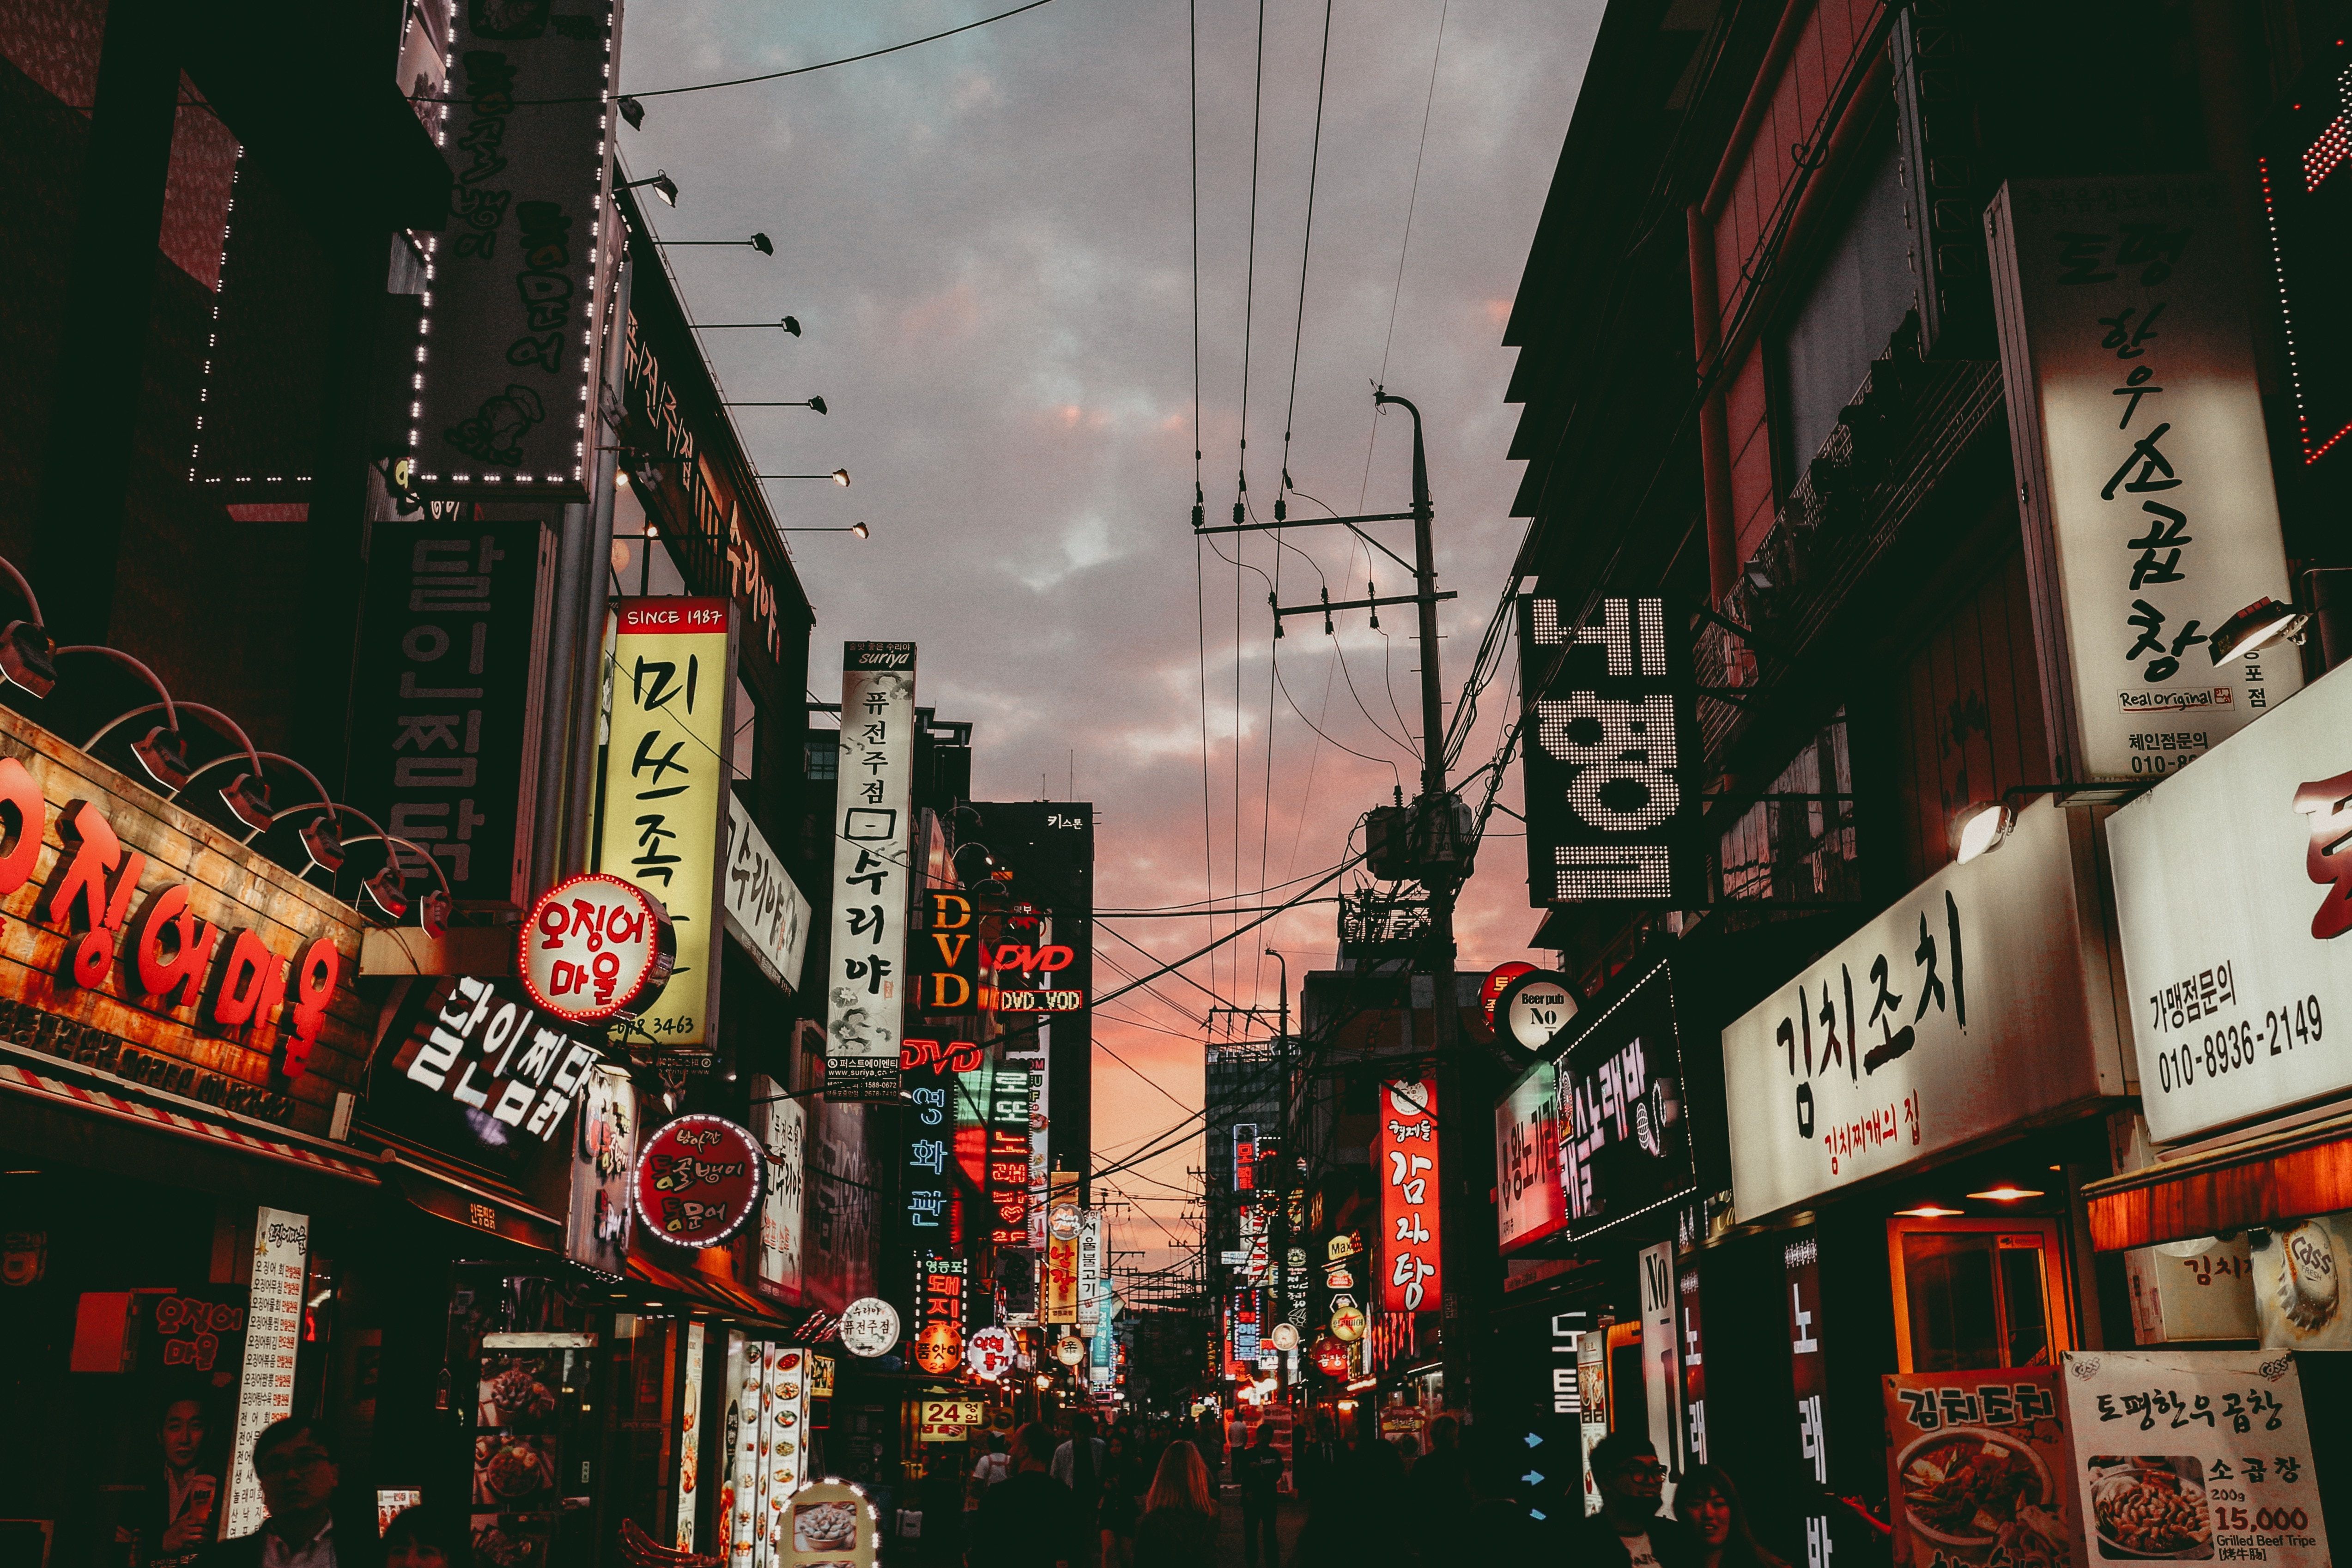 A city street with many signs in Korean. - Seoul, Korean